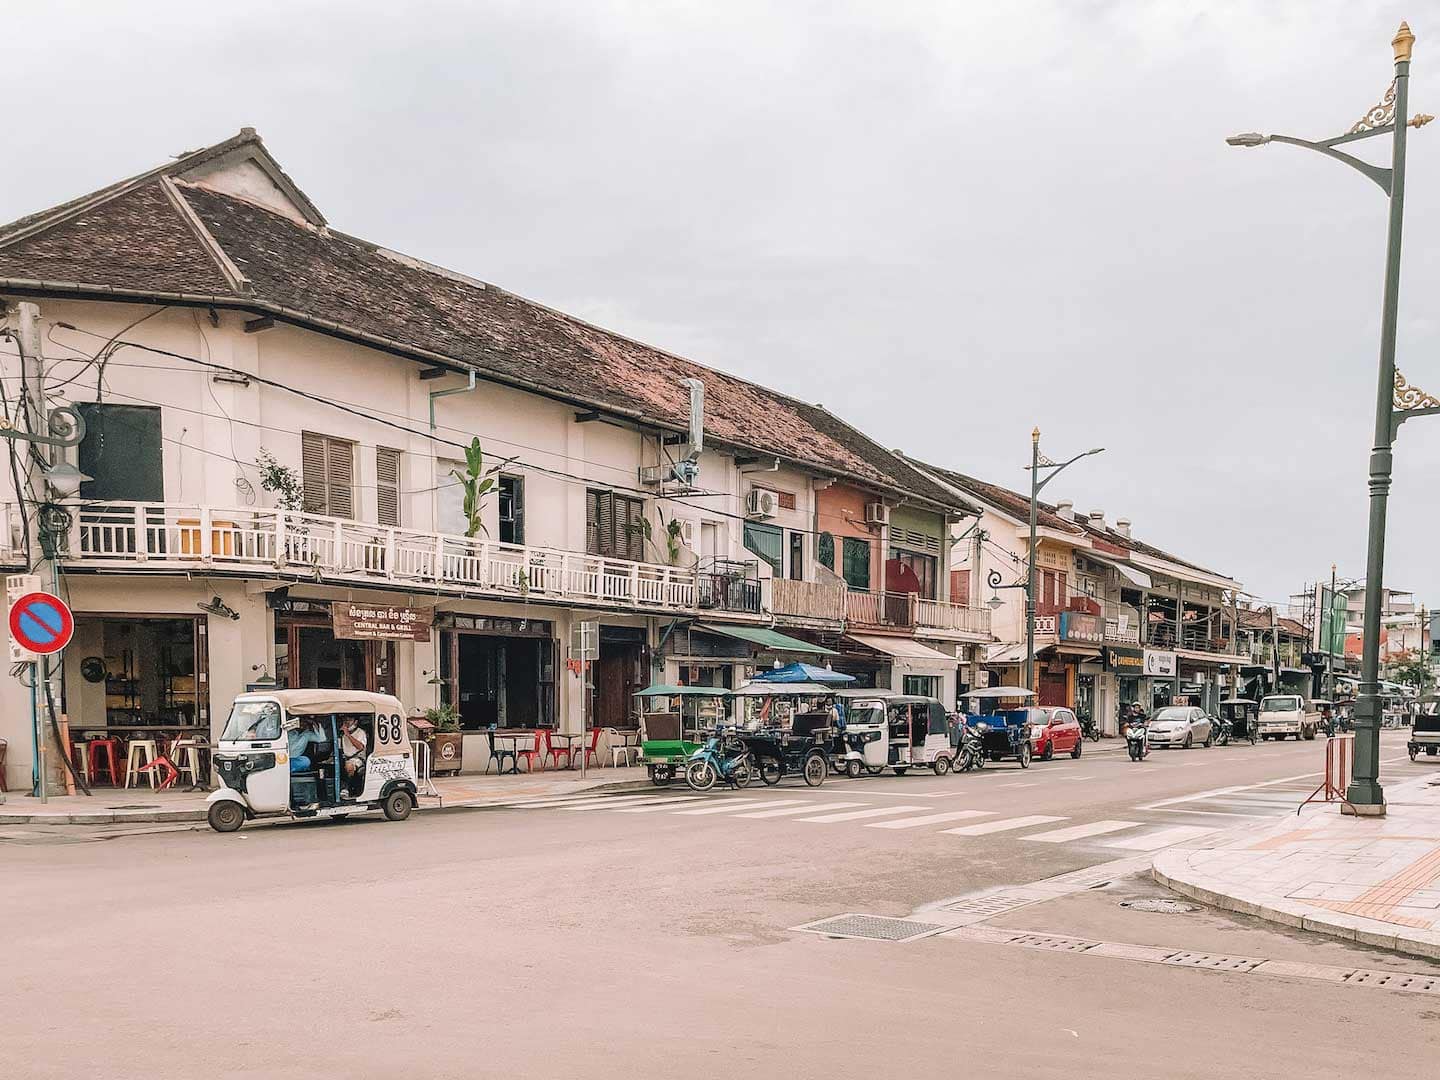 A street in Siem Reap city center on a cloudy day. There isn't much traffic but tuk tuks parked on the side of the road